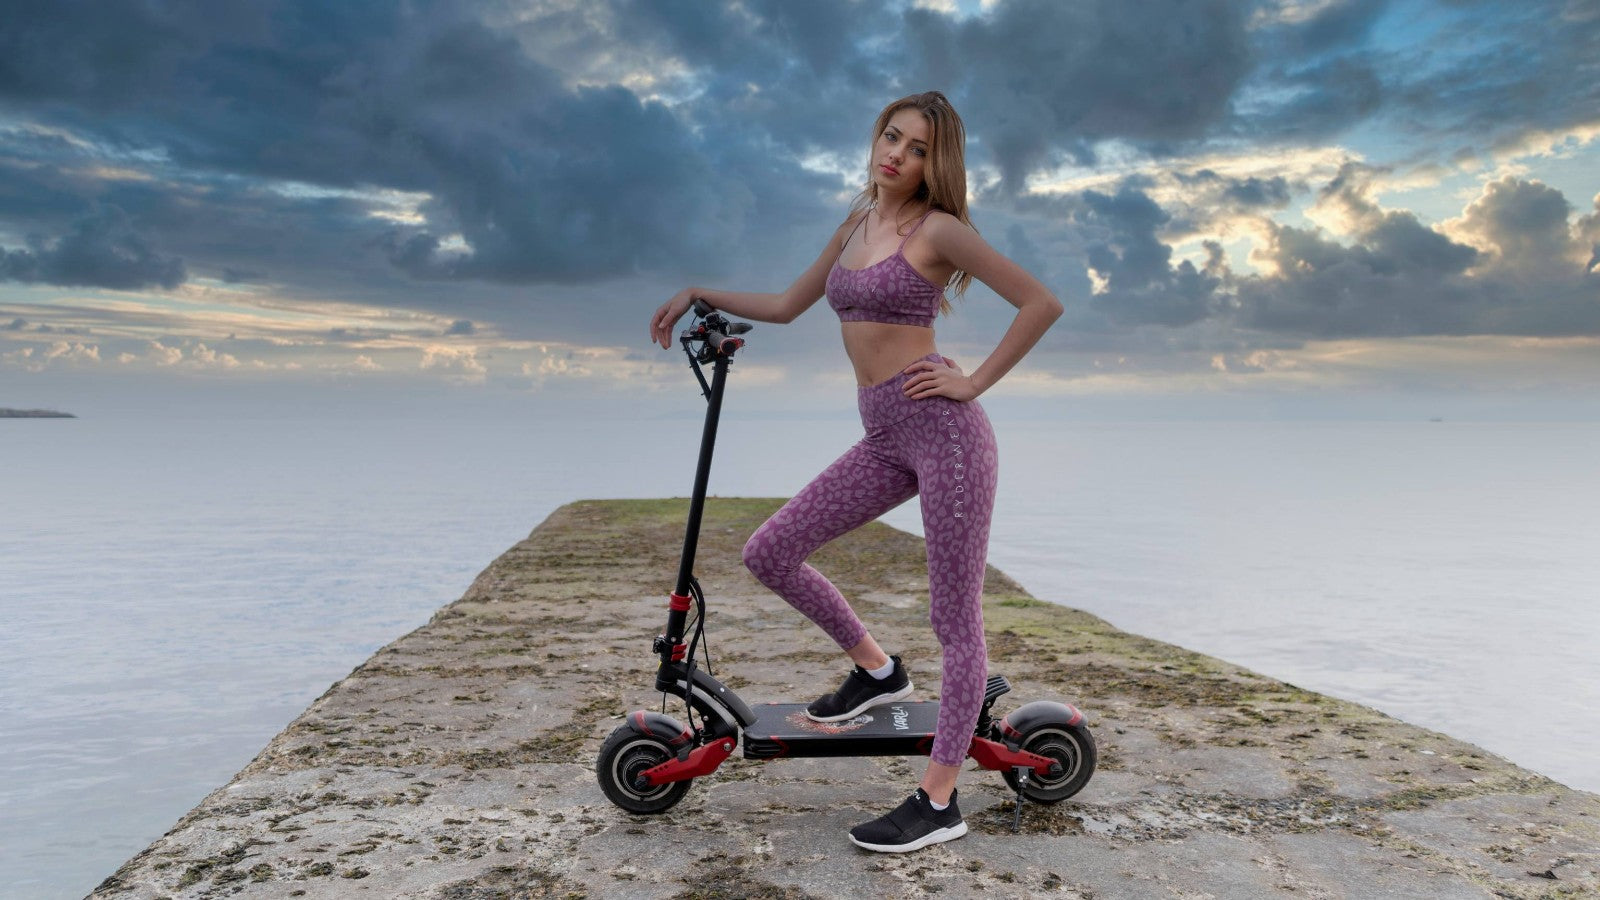 Does Riding an Off-Road Electric Scooter Burn Calories?